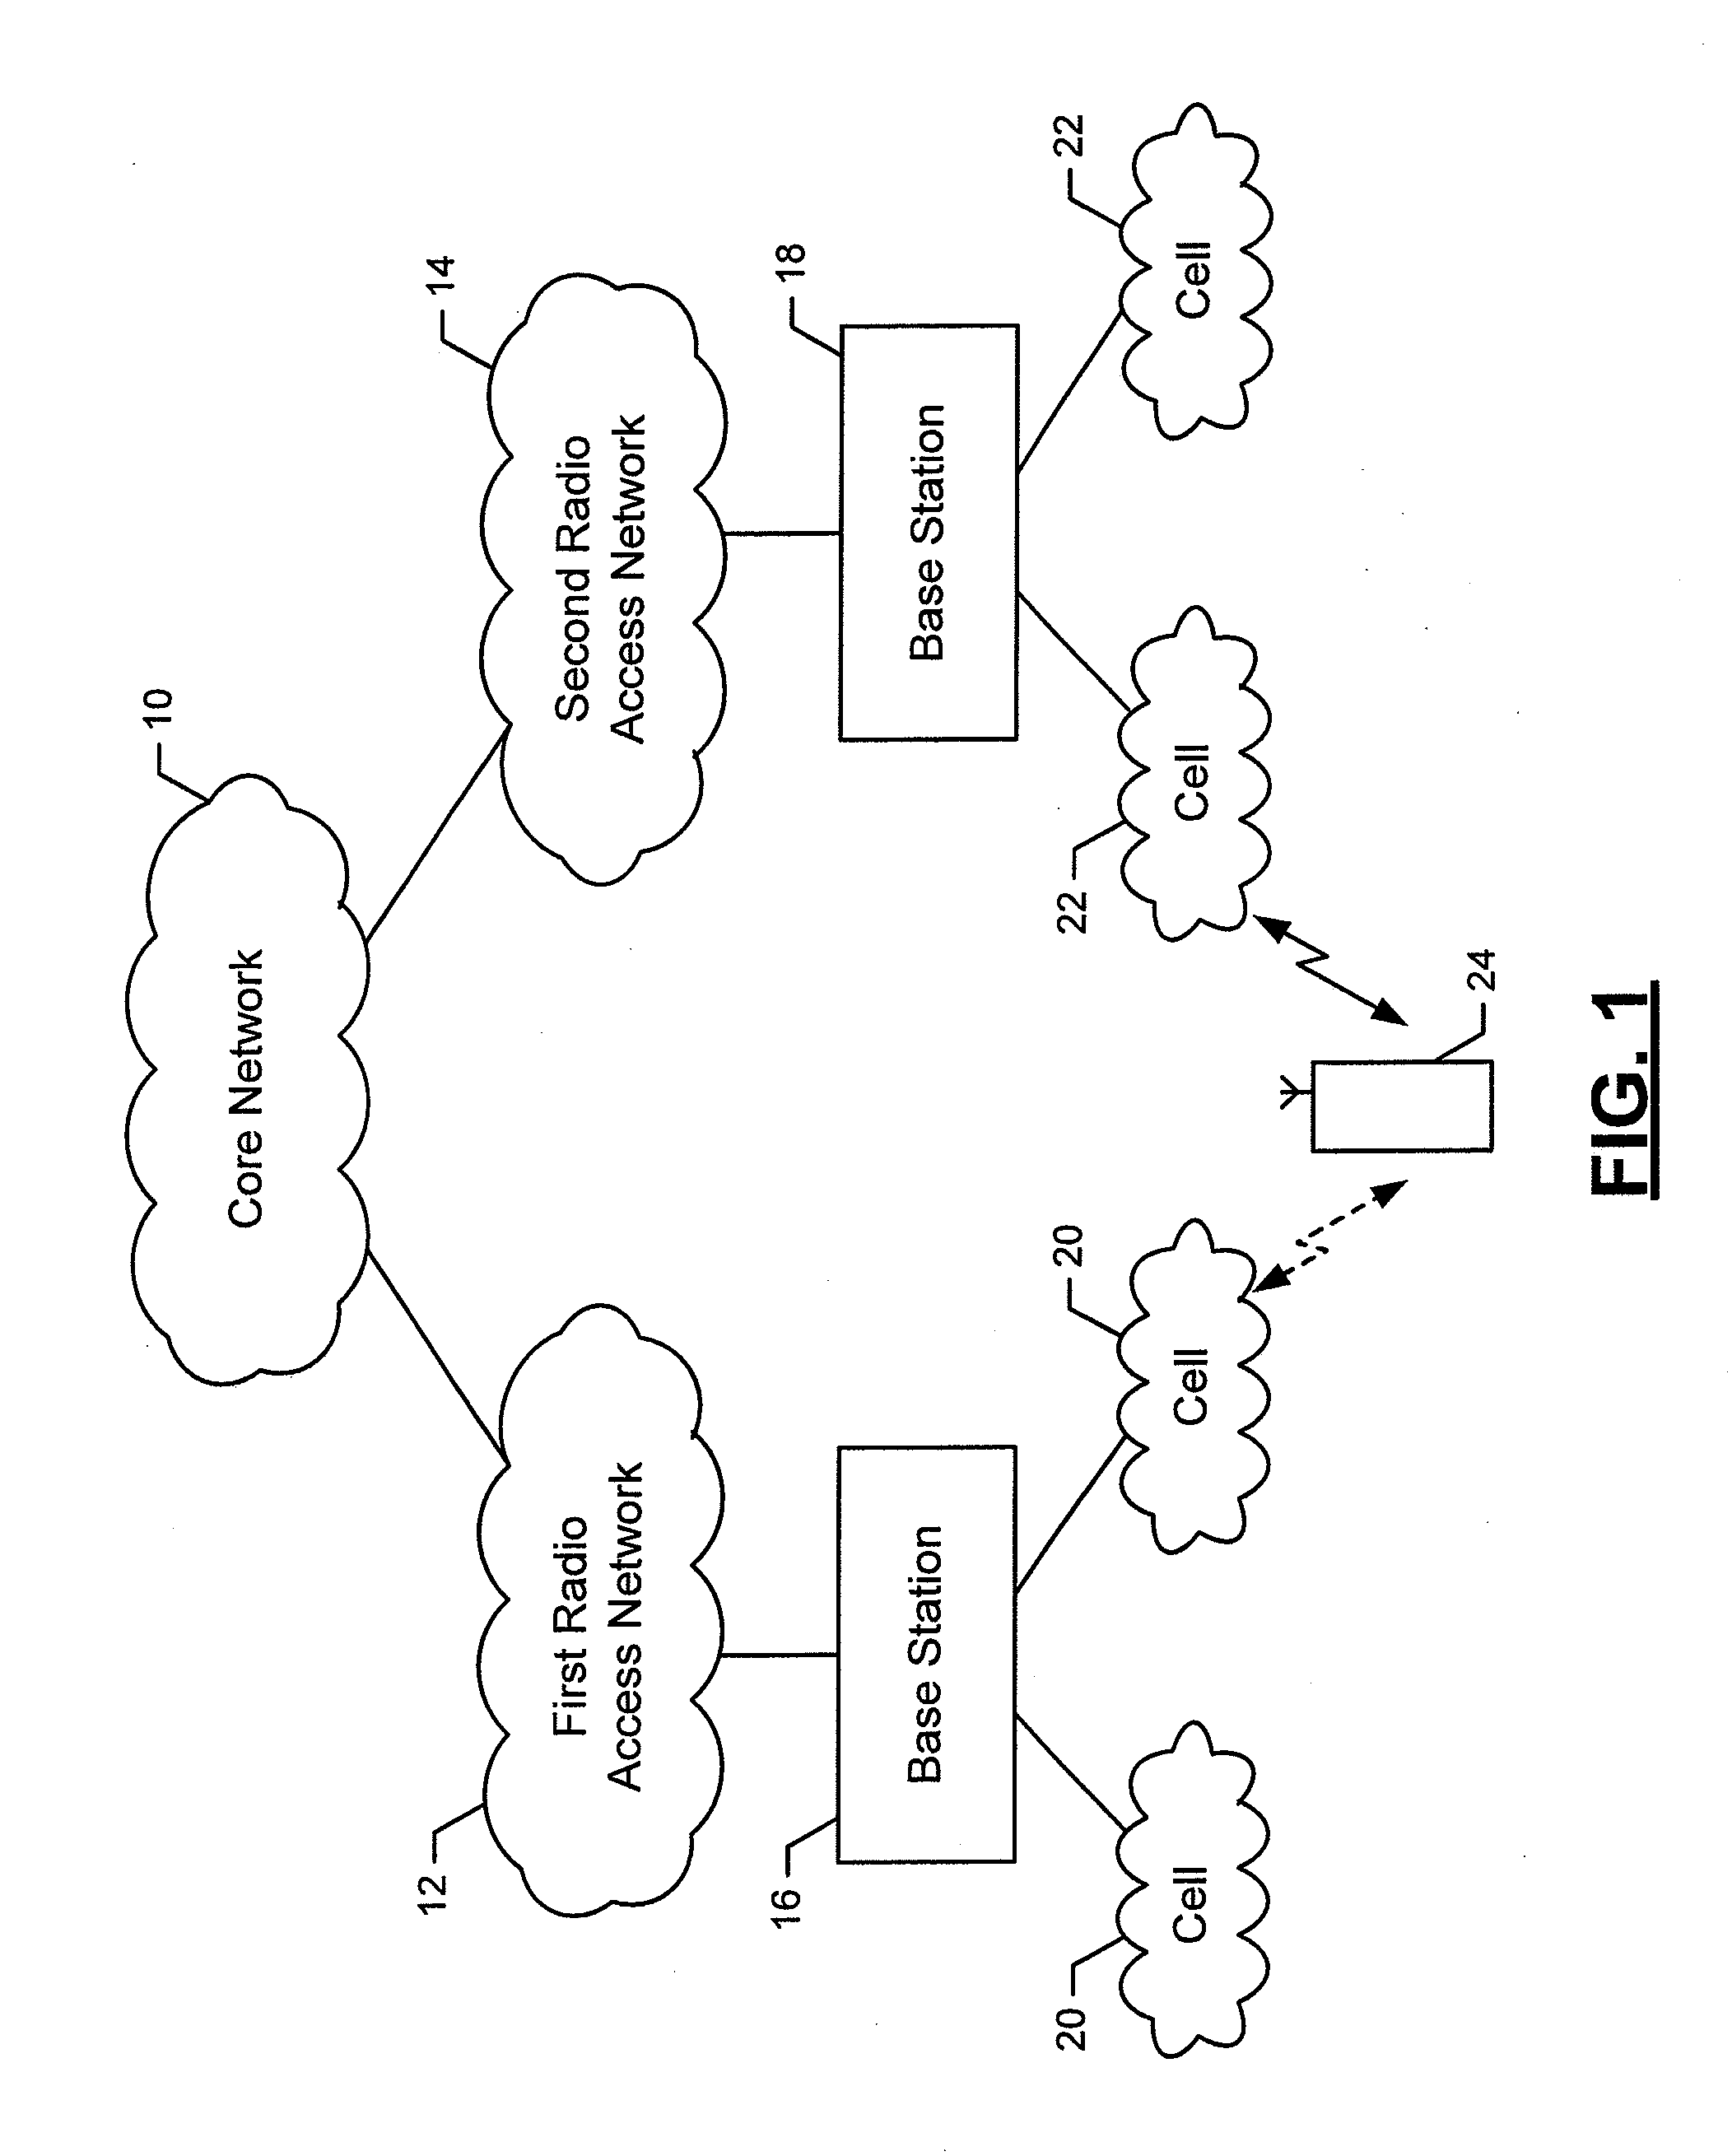 Method and apparatus for intelligently reporting neighbor information to facilitate automatic neighbor relations